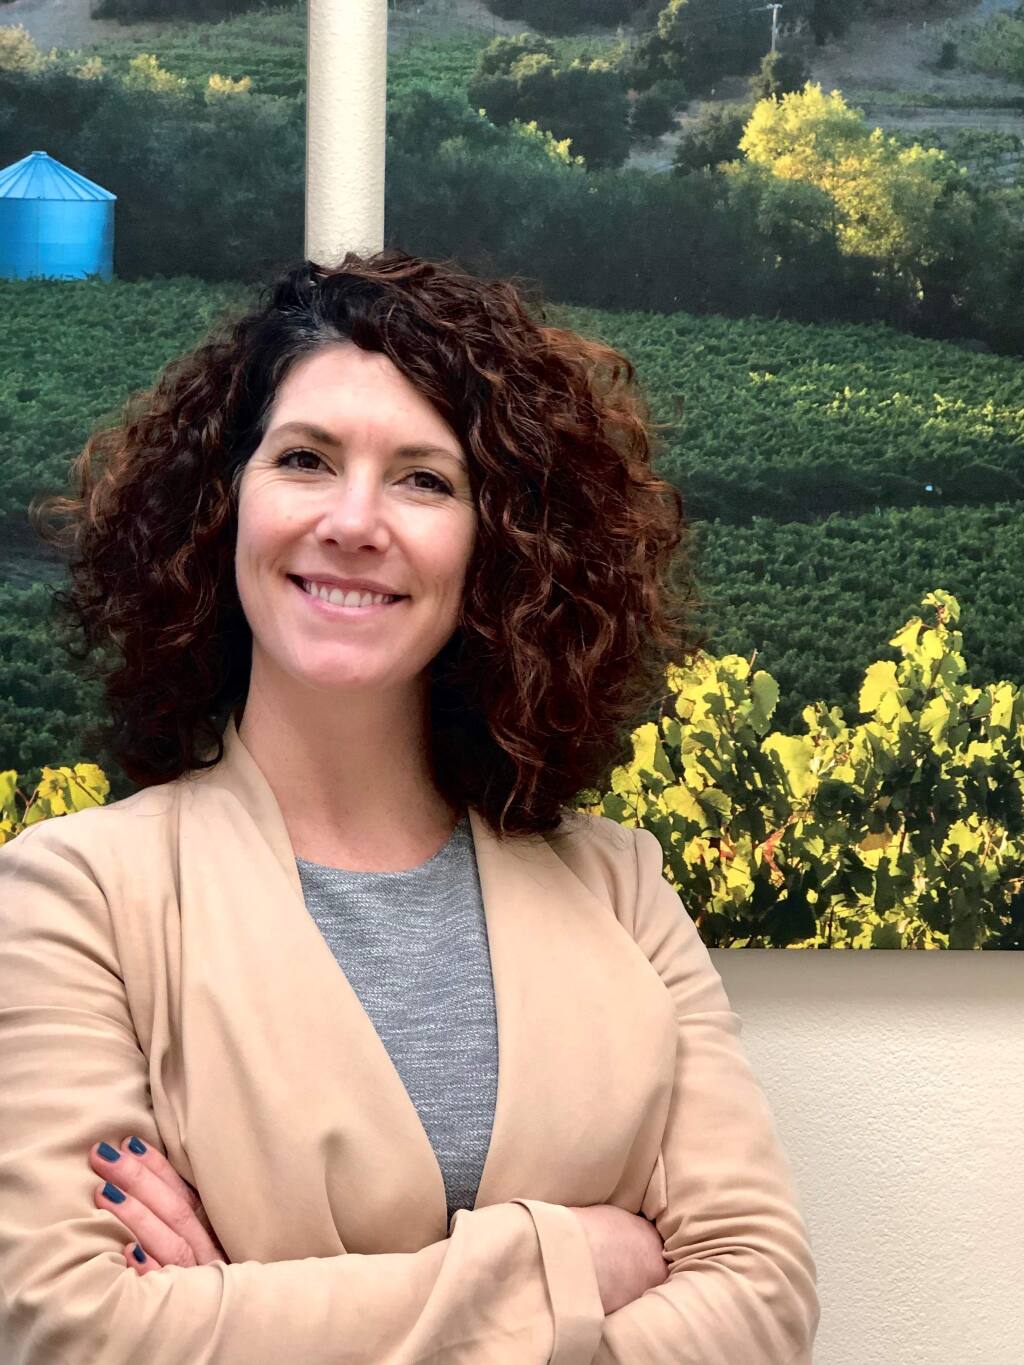 Tara Johnson, assistant vice president and Healdsburg branch manager II for Novato-based Bank of Marin, is one of North Bay Business Journal's Forty Under 40 notable young professionals for 2019. (PROVIDED PHOTO)